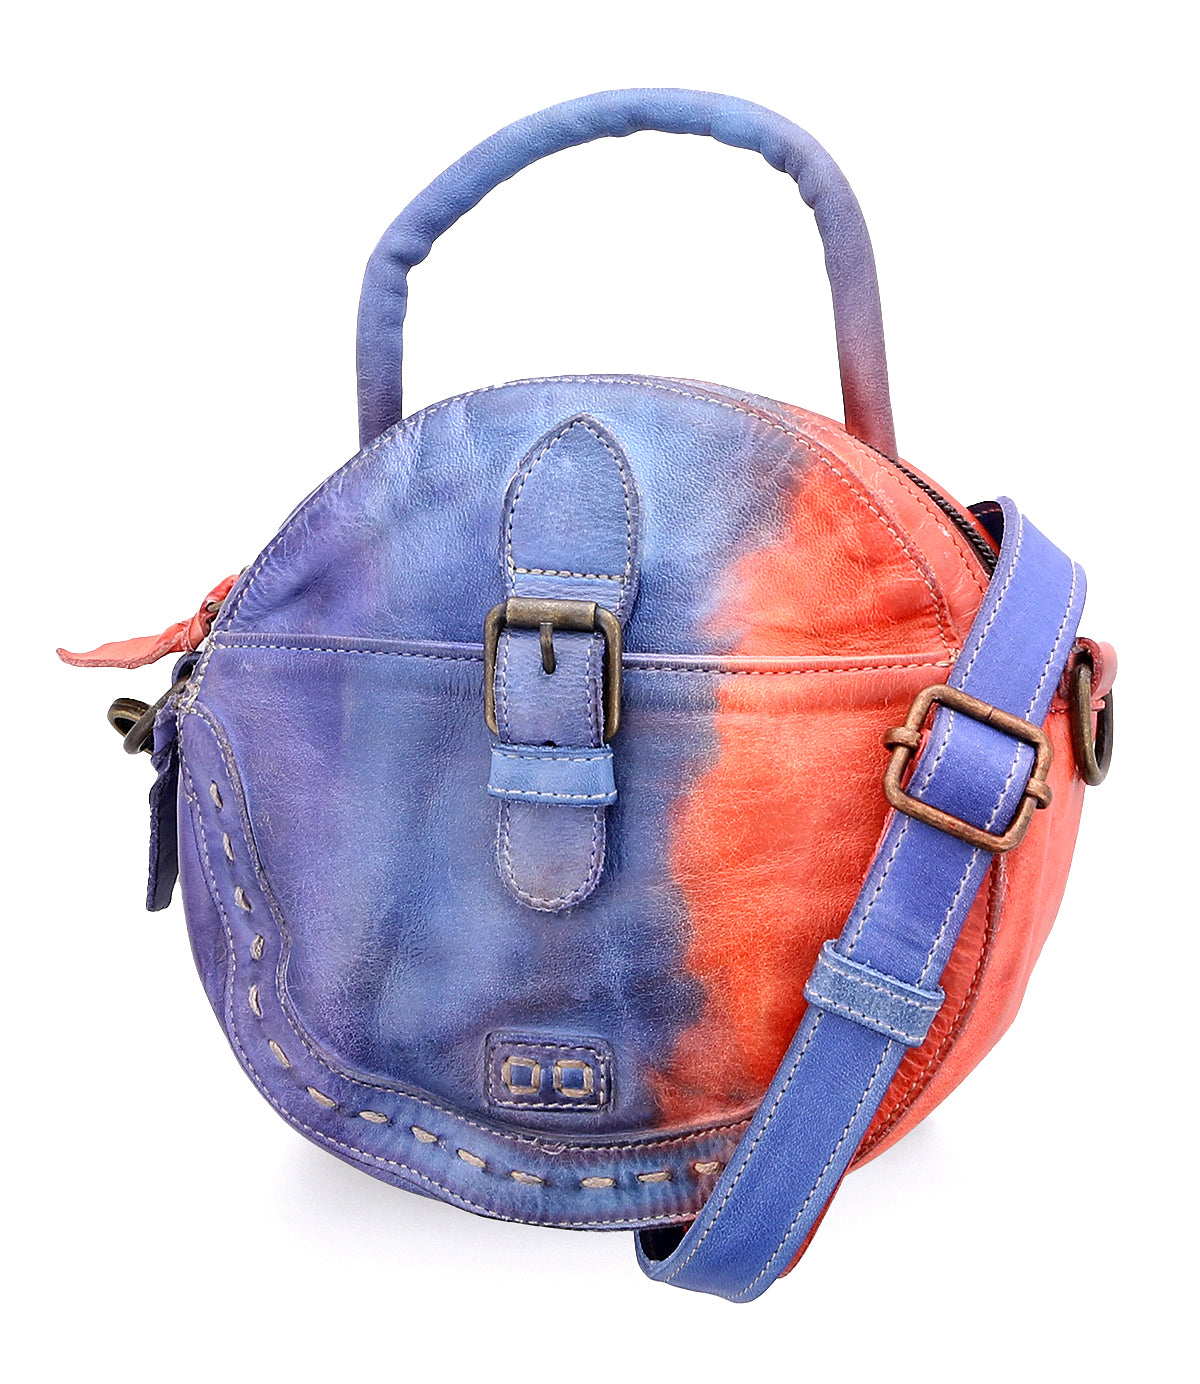 Bed Stu multicolored round compact crossbody bag with adjustable crossbody strap and buckle closure.